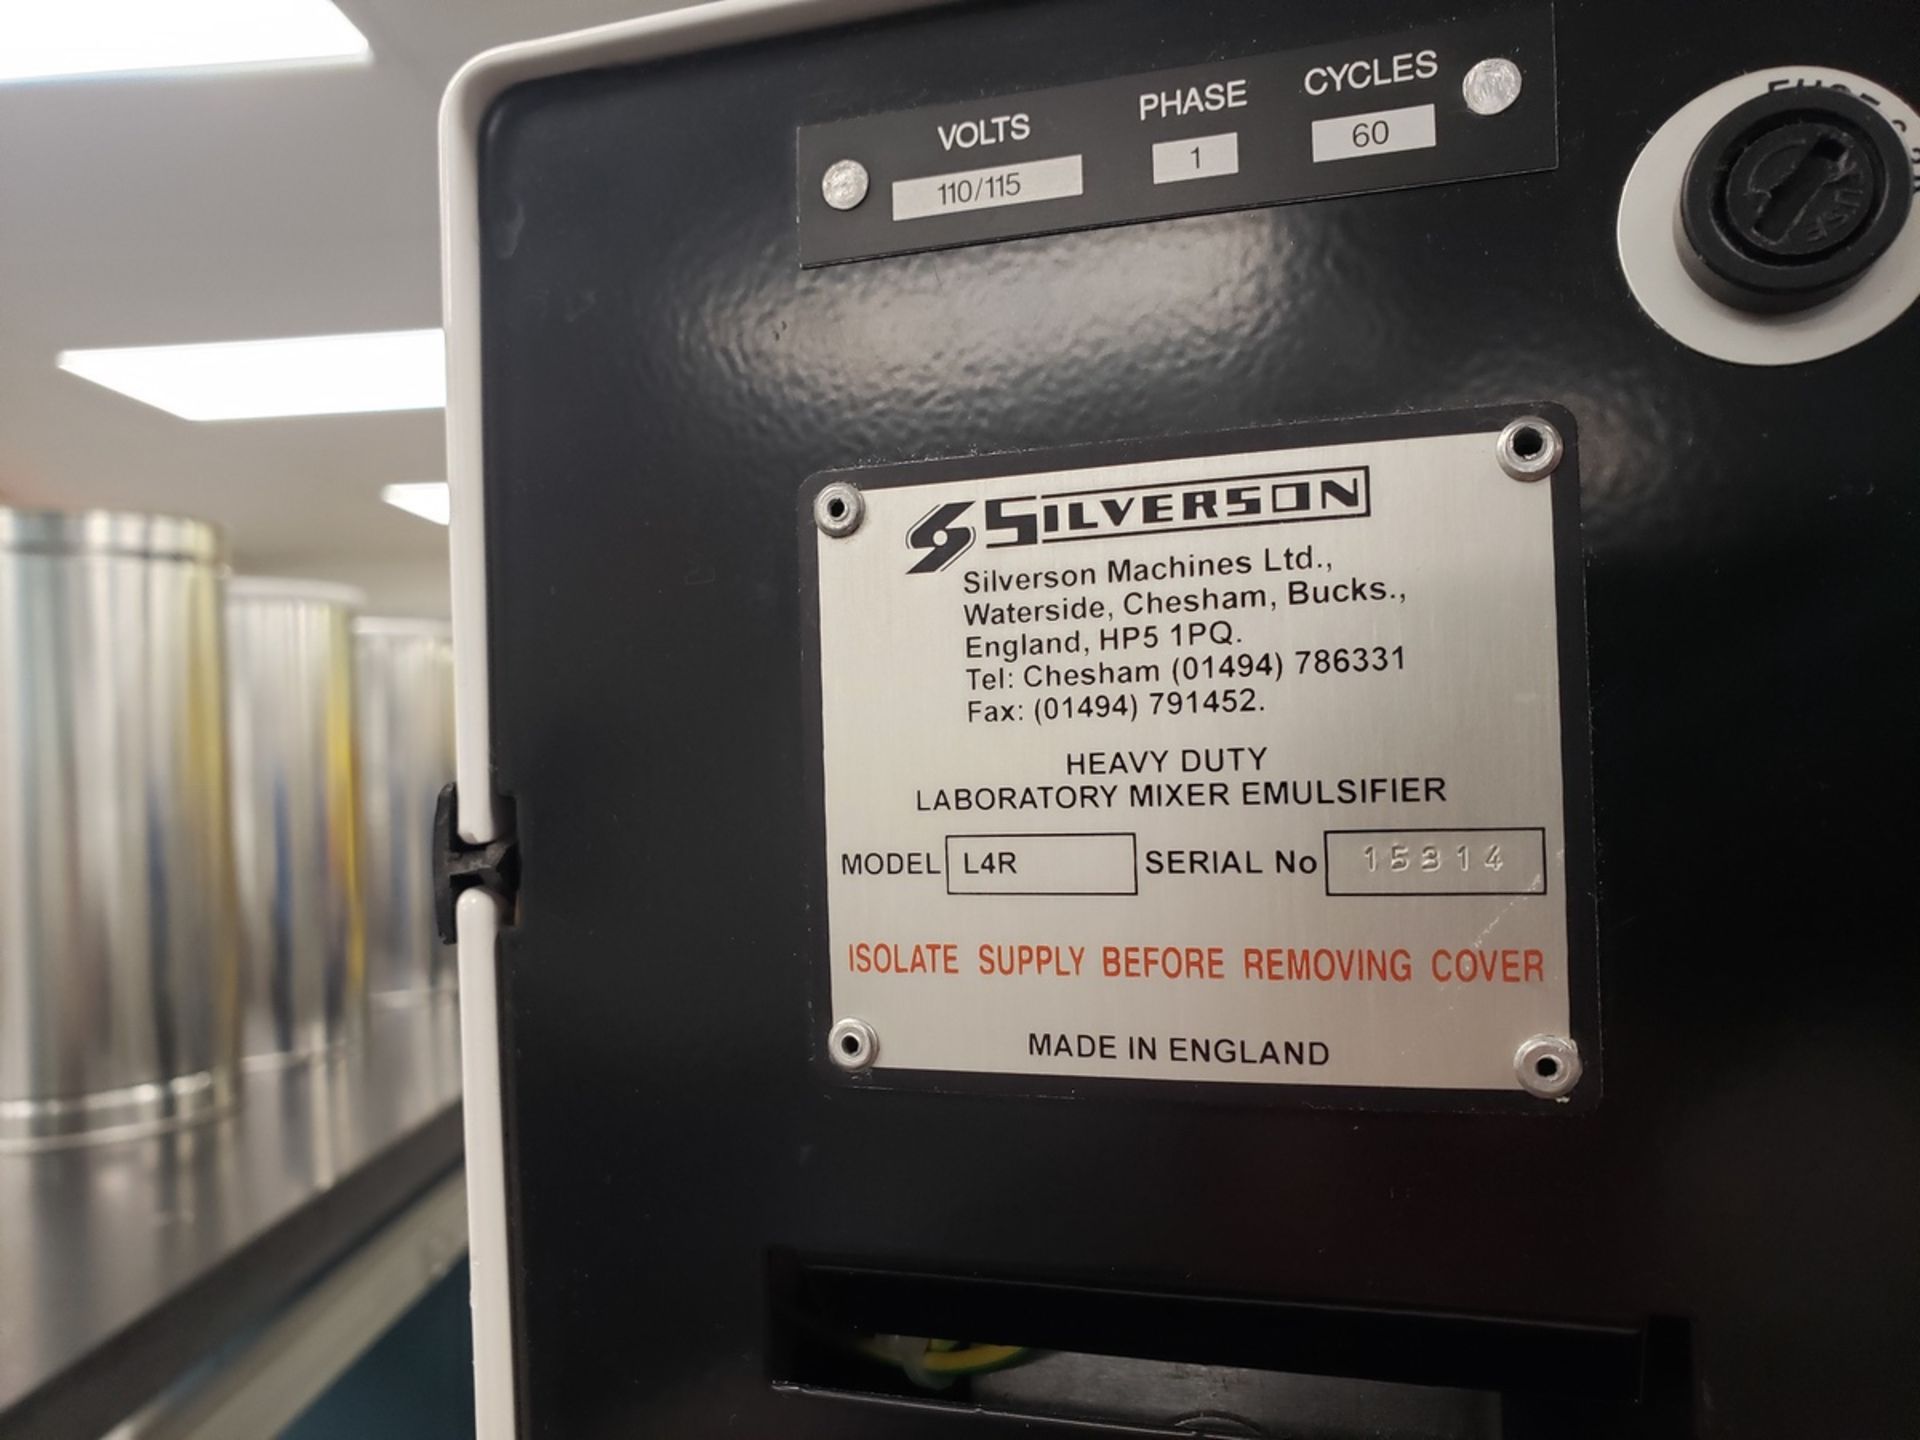 Silverson Laboratory Mixer Emulsifier, M# L4R, S/N 15314 | Rig Fee $50 - Image 2 of 2